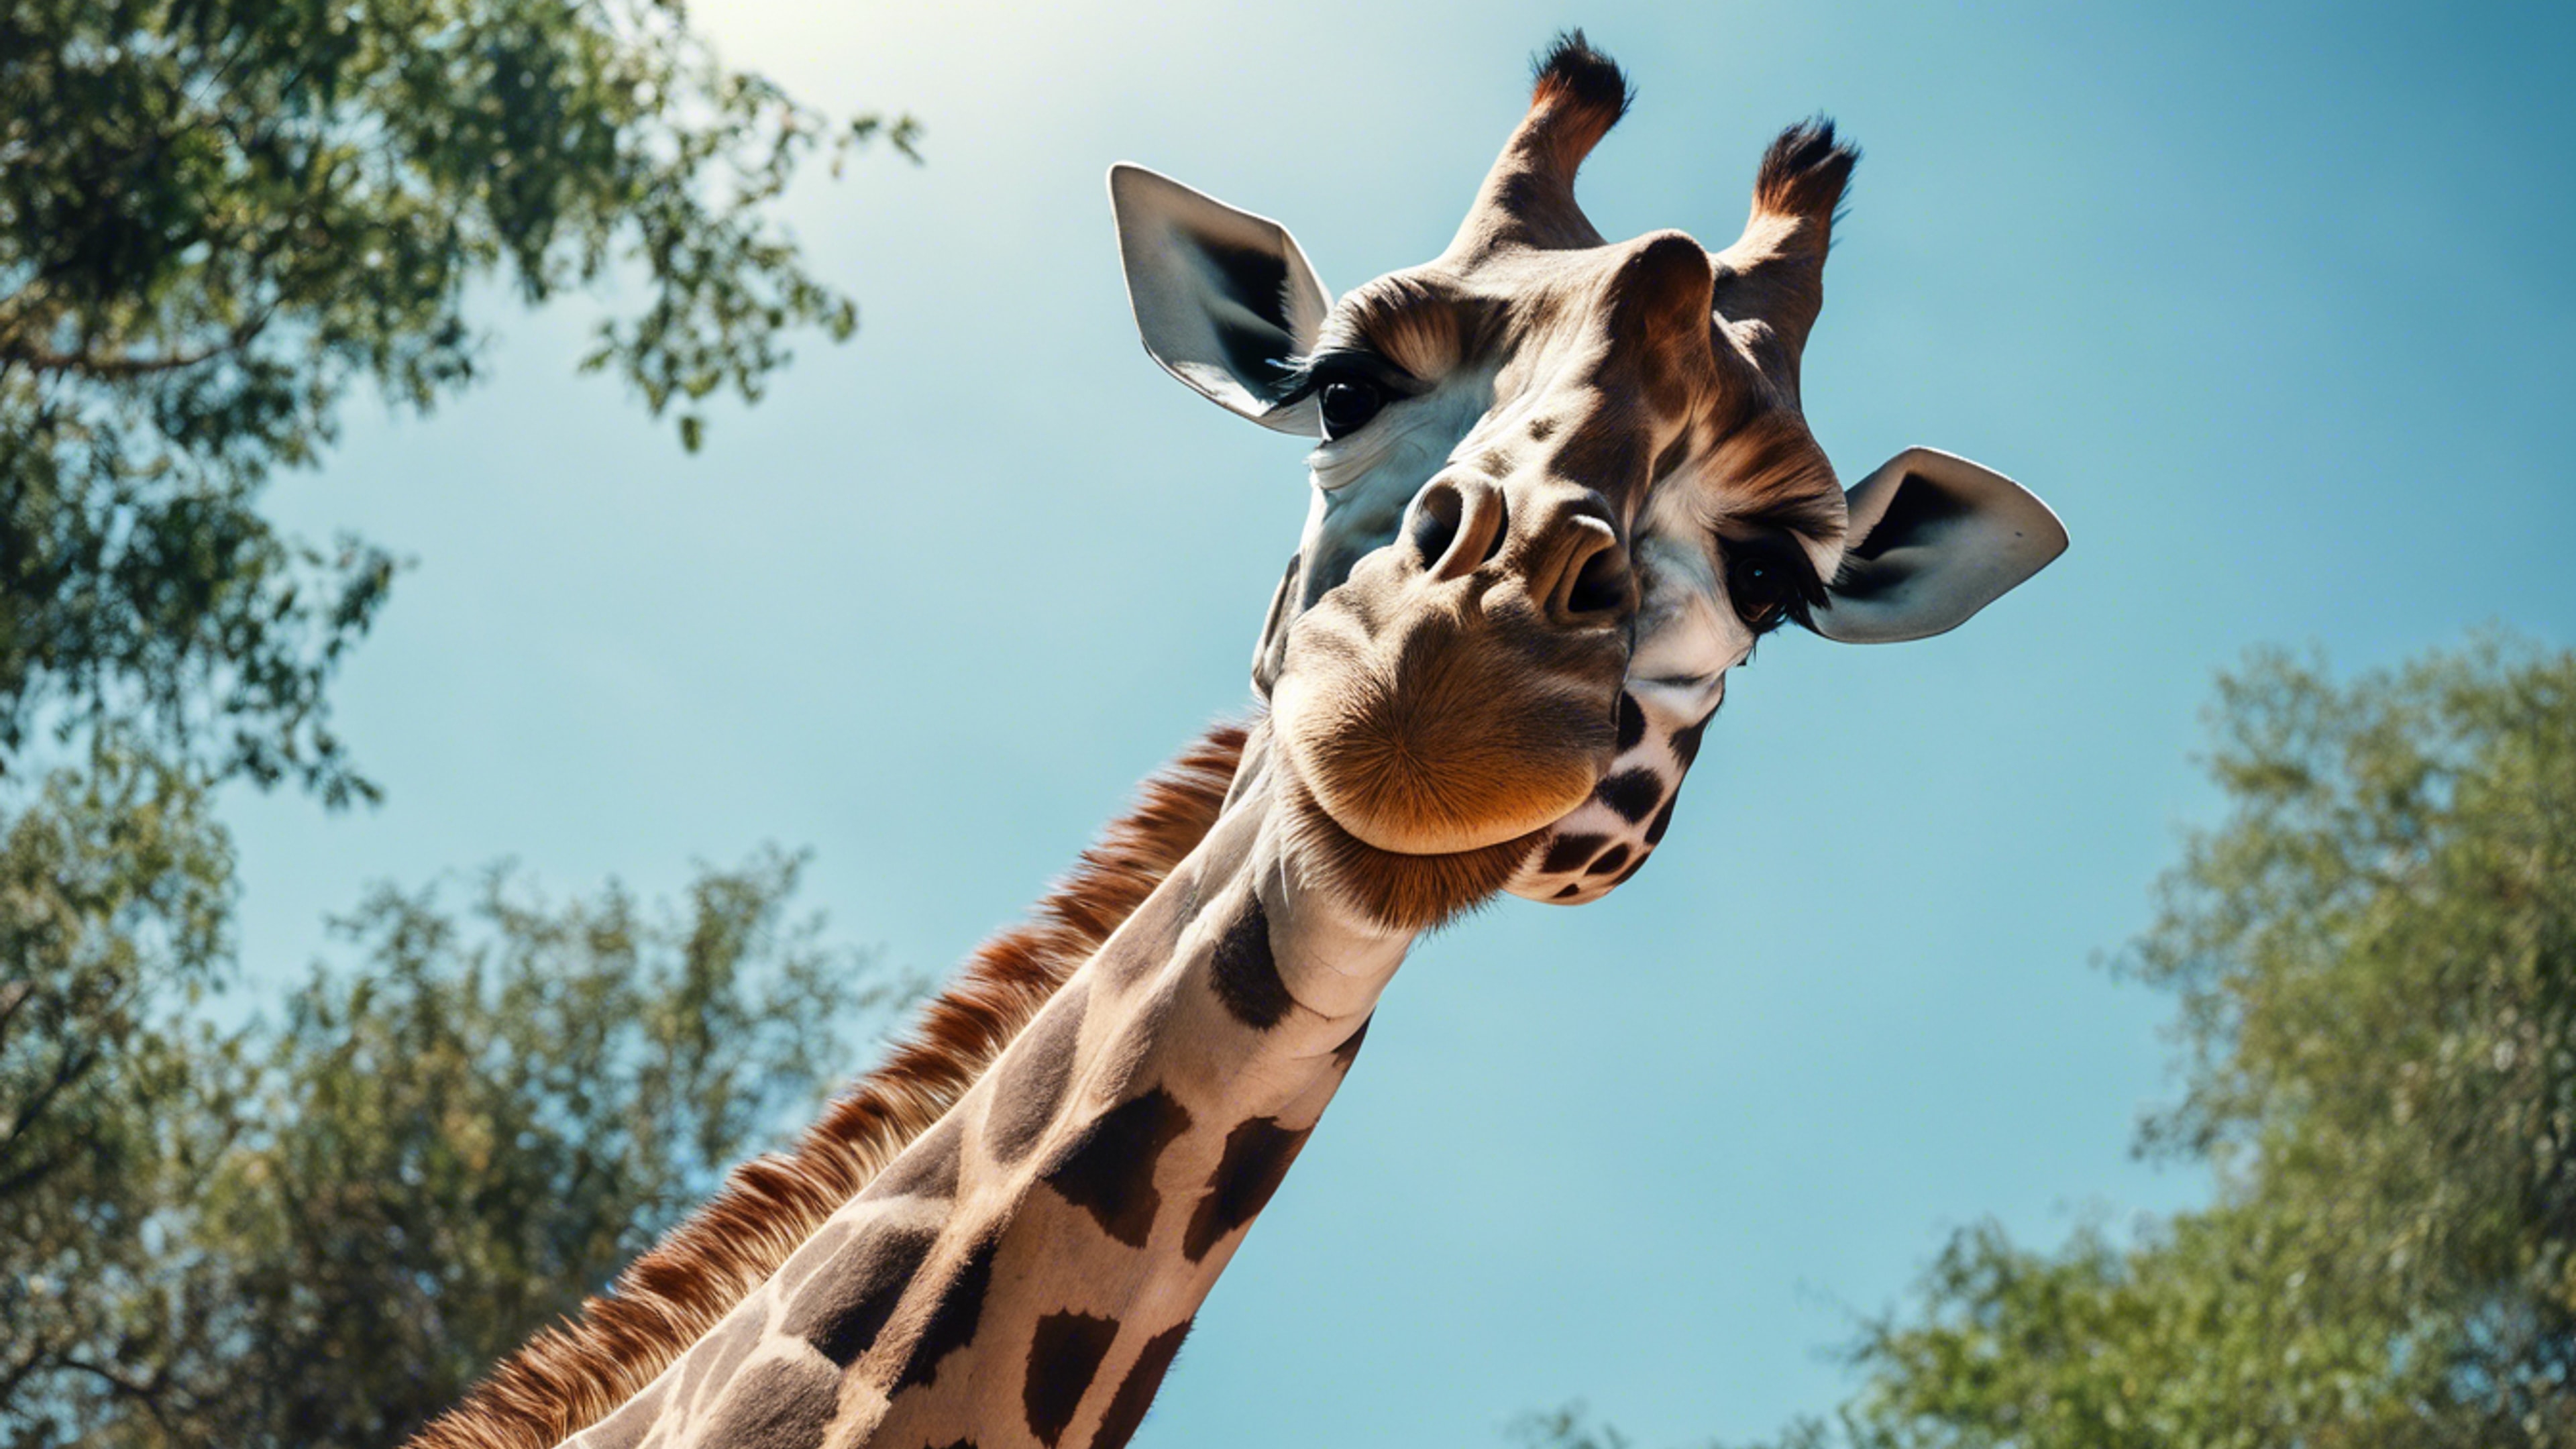 A picture from a below angle showing the towering magnificence of a giraffe against a clear blue sky. ورق الجدران[8a88956d9aa2483bb204]